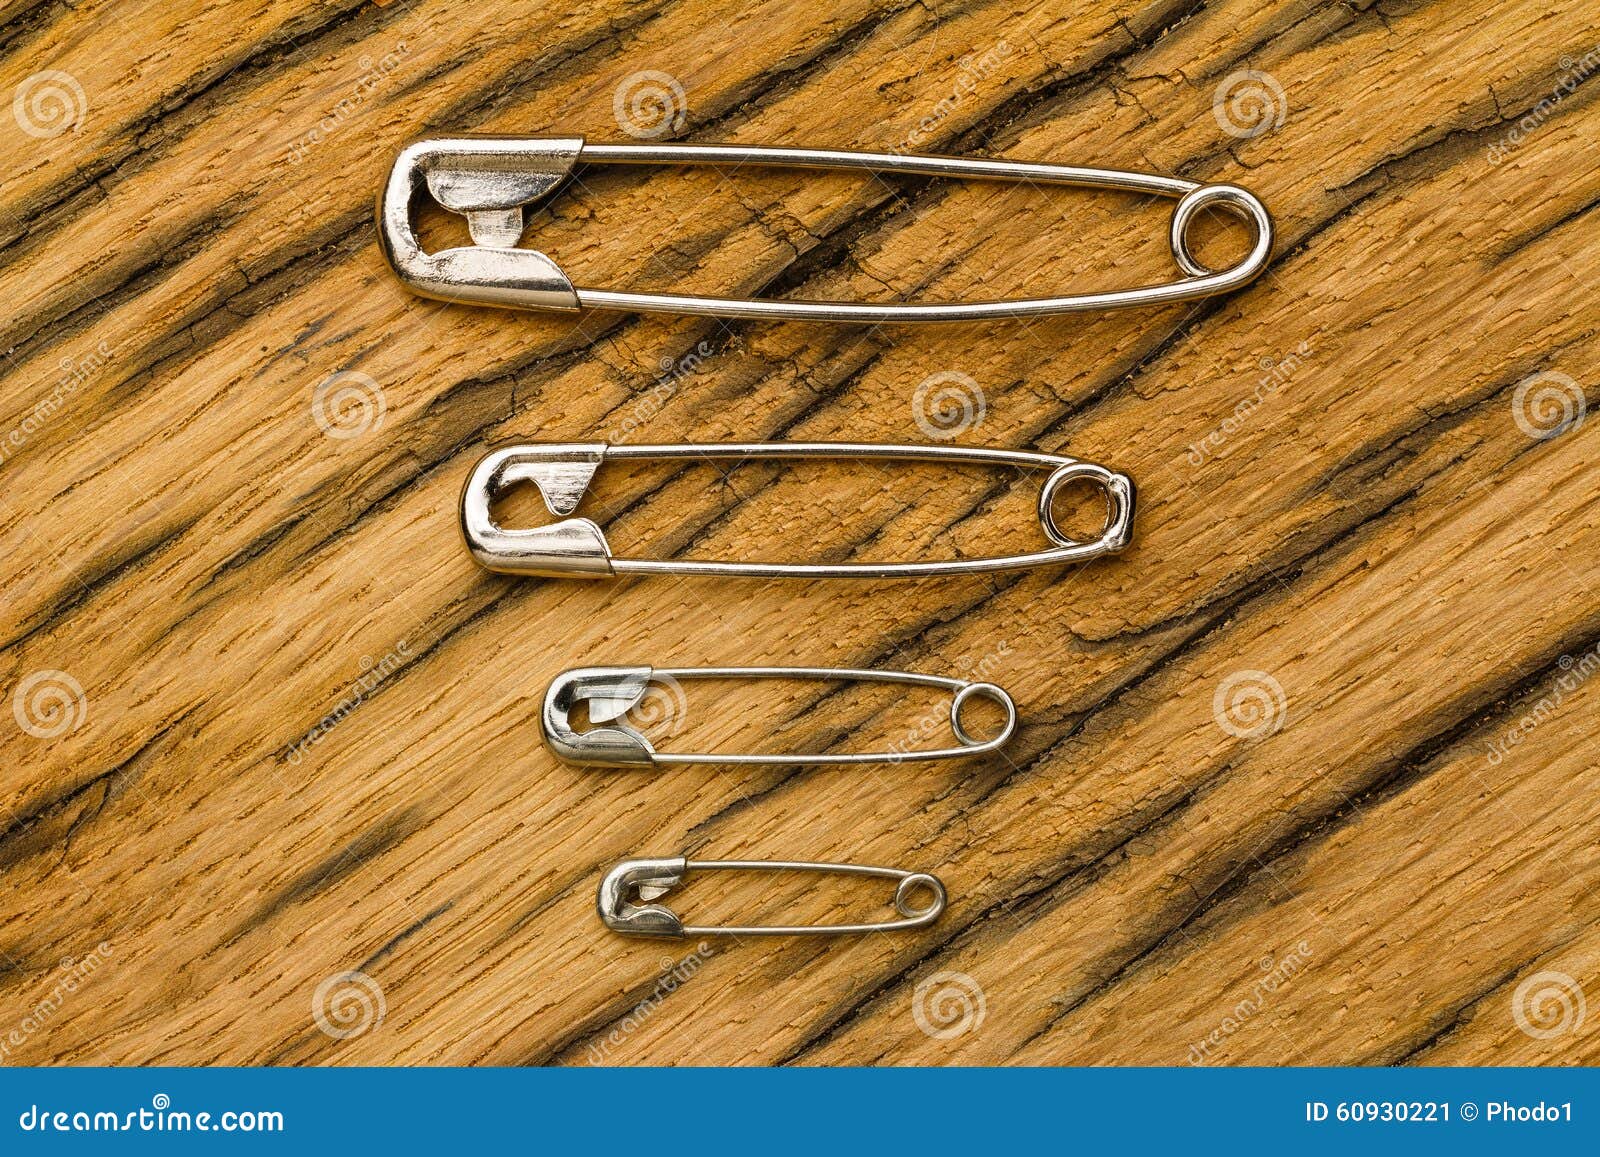 Safety Pins Small To Big on Wood Stock Image - Image of design